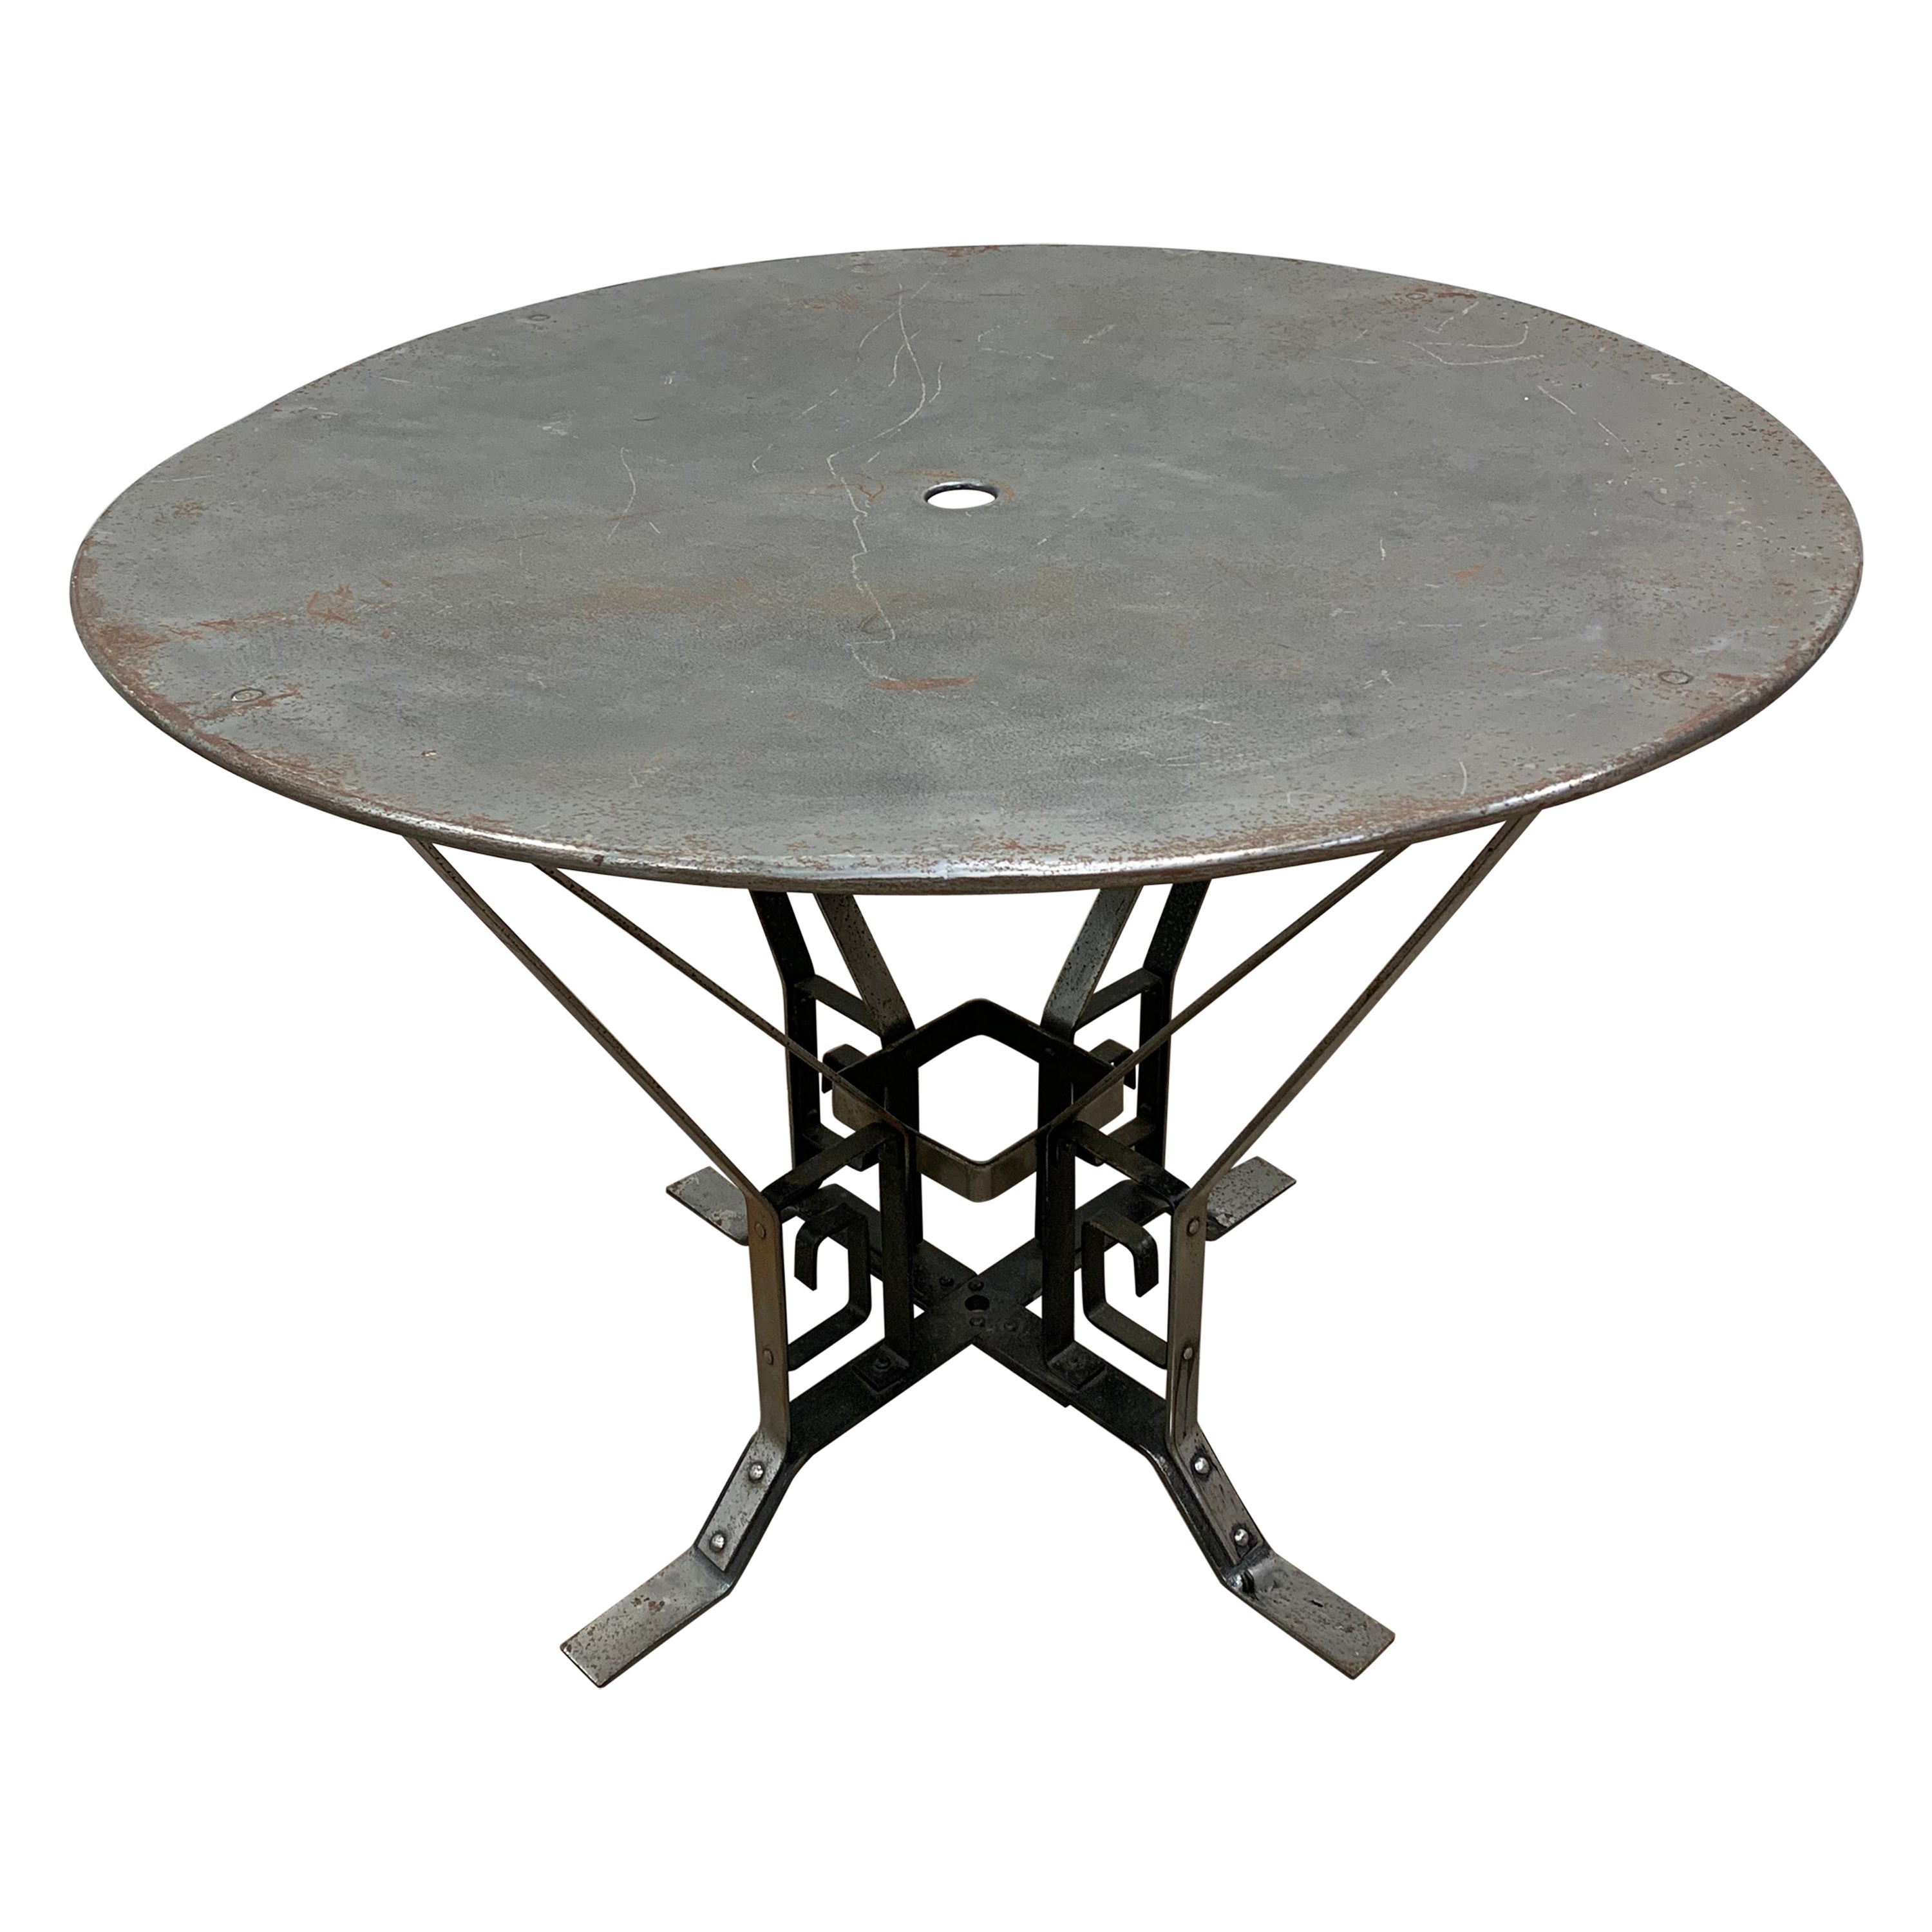 1930s Art Deco French Architecturally Inspired Polished Metal Garden Table 